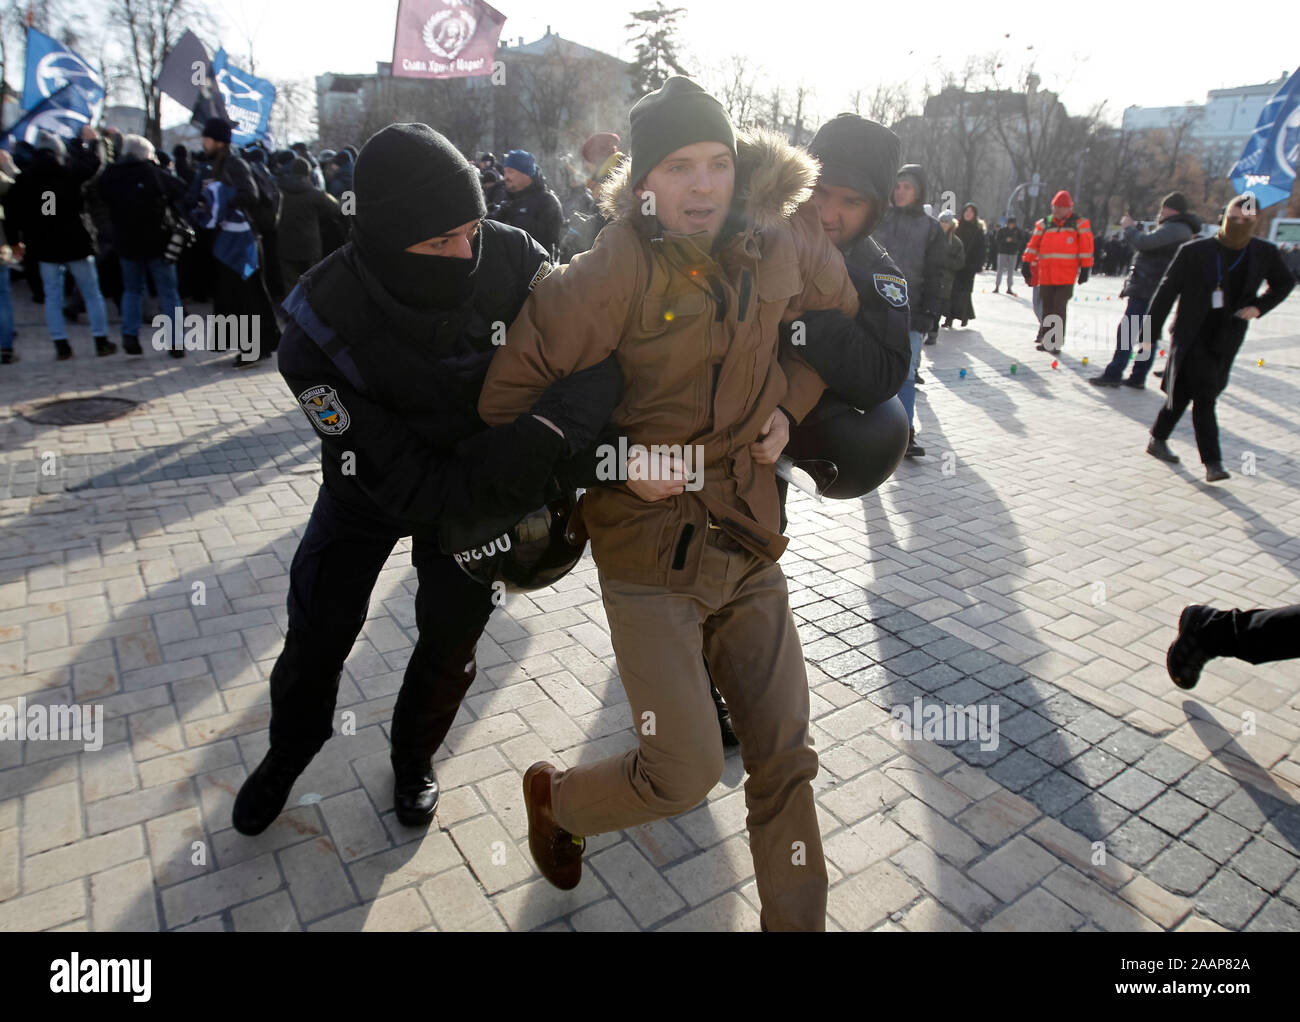 Policemen arrest a far-right activist during the march.Transgender rights activists in Ukraine’s capital Kyiv held a march to mark Transgender Day of Remembrance. In 2018, the police failed to protect those participating in a similar march from attacks by violent groups advocating hatred and discrimination. This year, there is a serious risk of new attacks and the police must ensure people can safely exercise their rights to freedom of peaceful assembly and expression without discrimination. Stock Photo